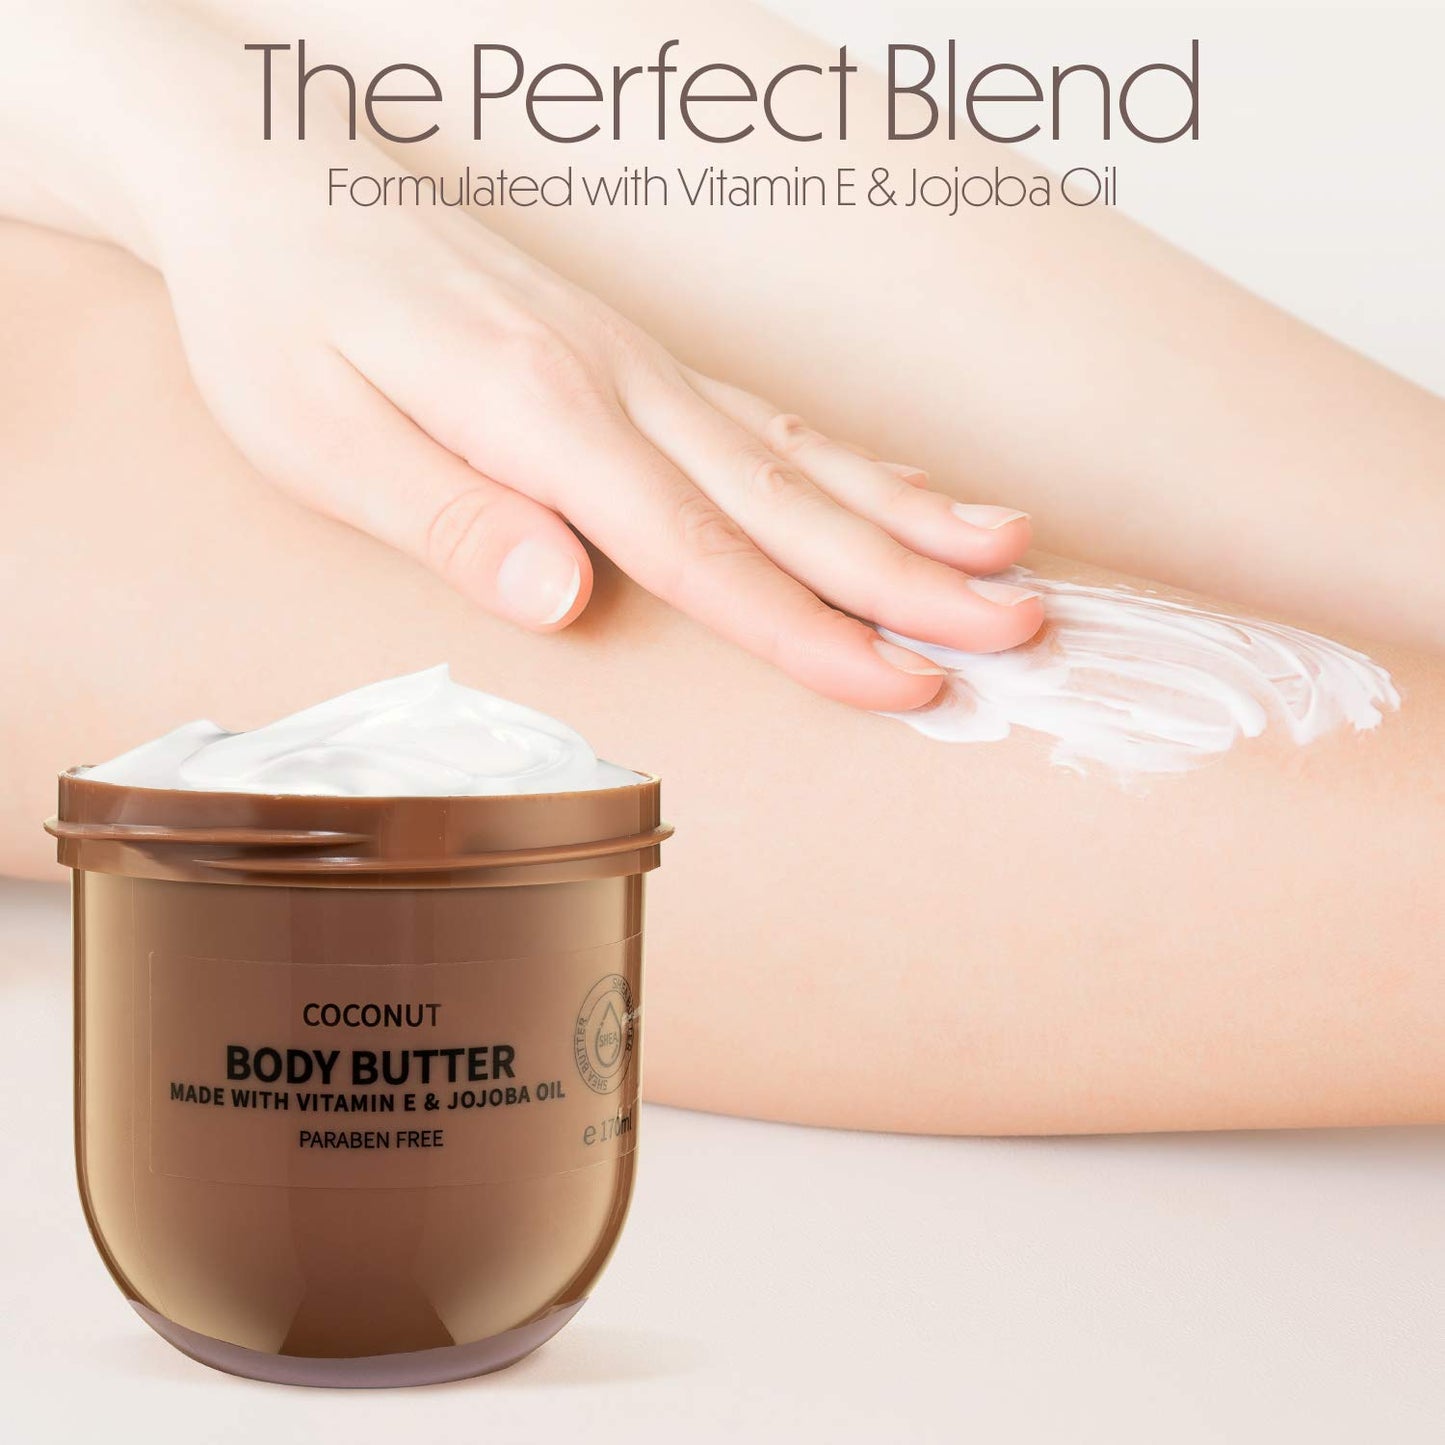 Coconut Body Butter - 6oz Whipped Cream